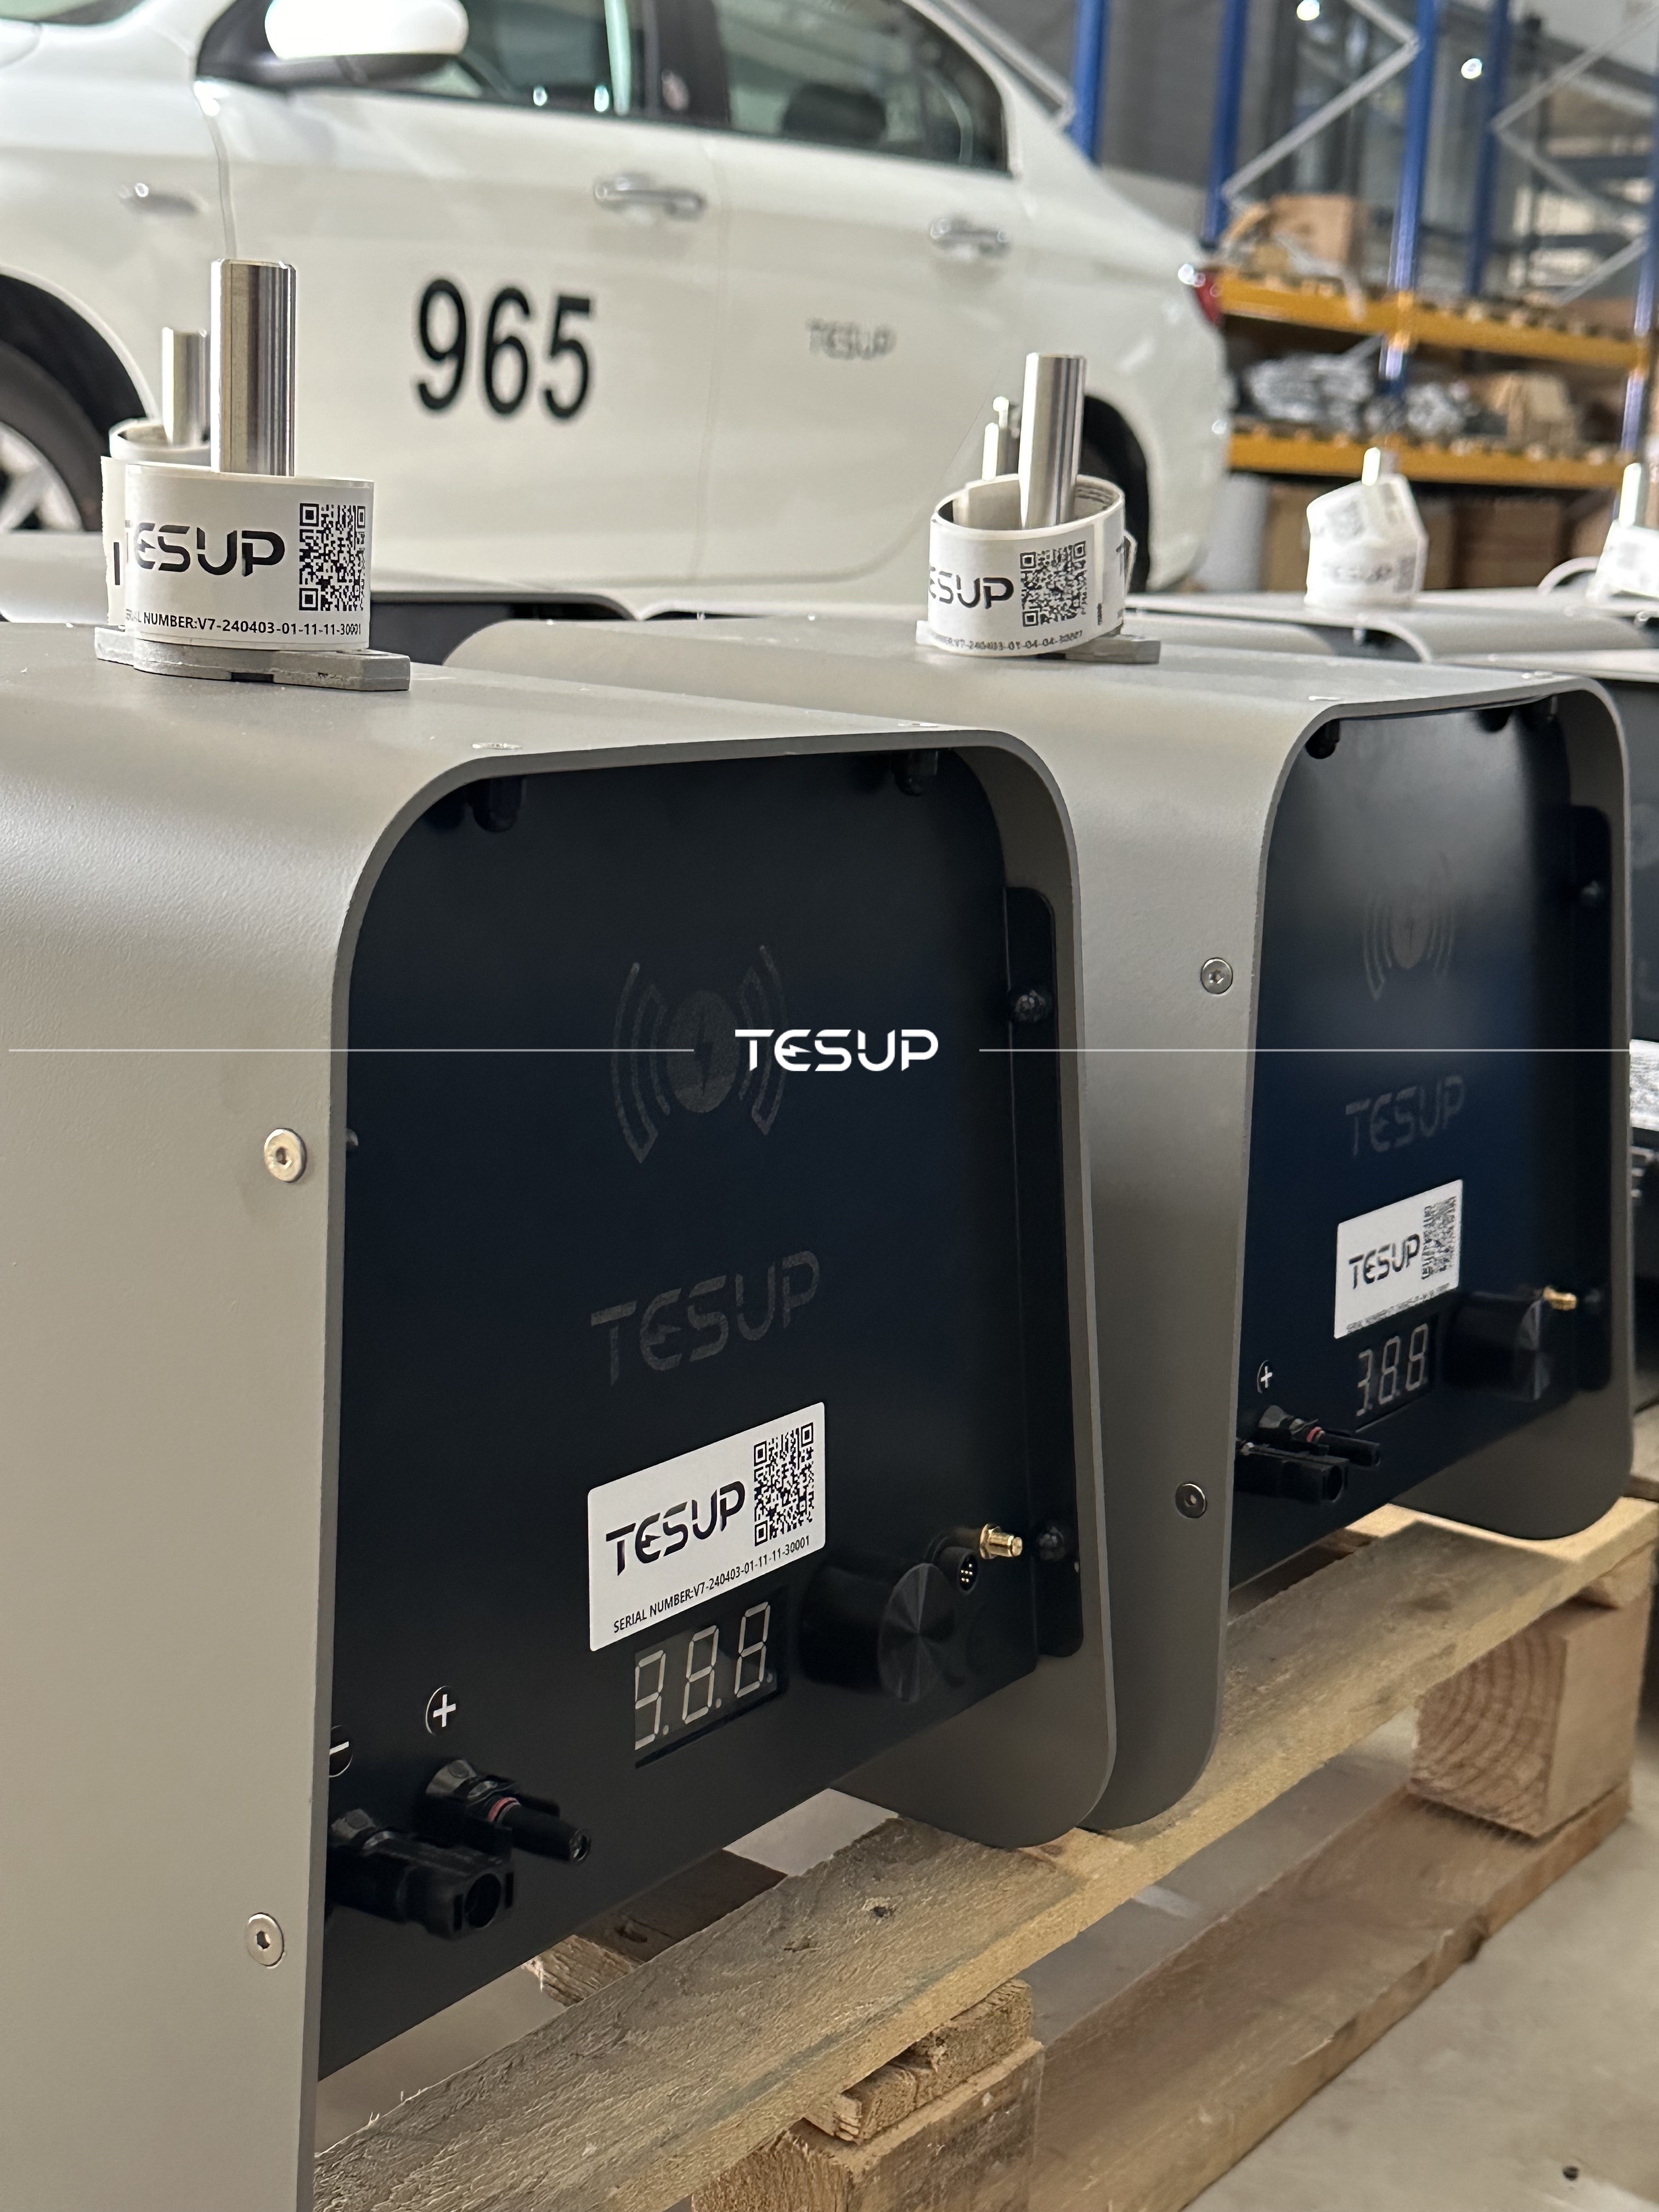 New Manufacturing Record by TESUP!